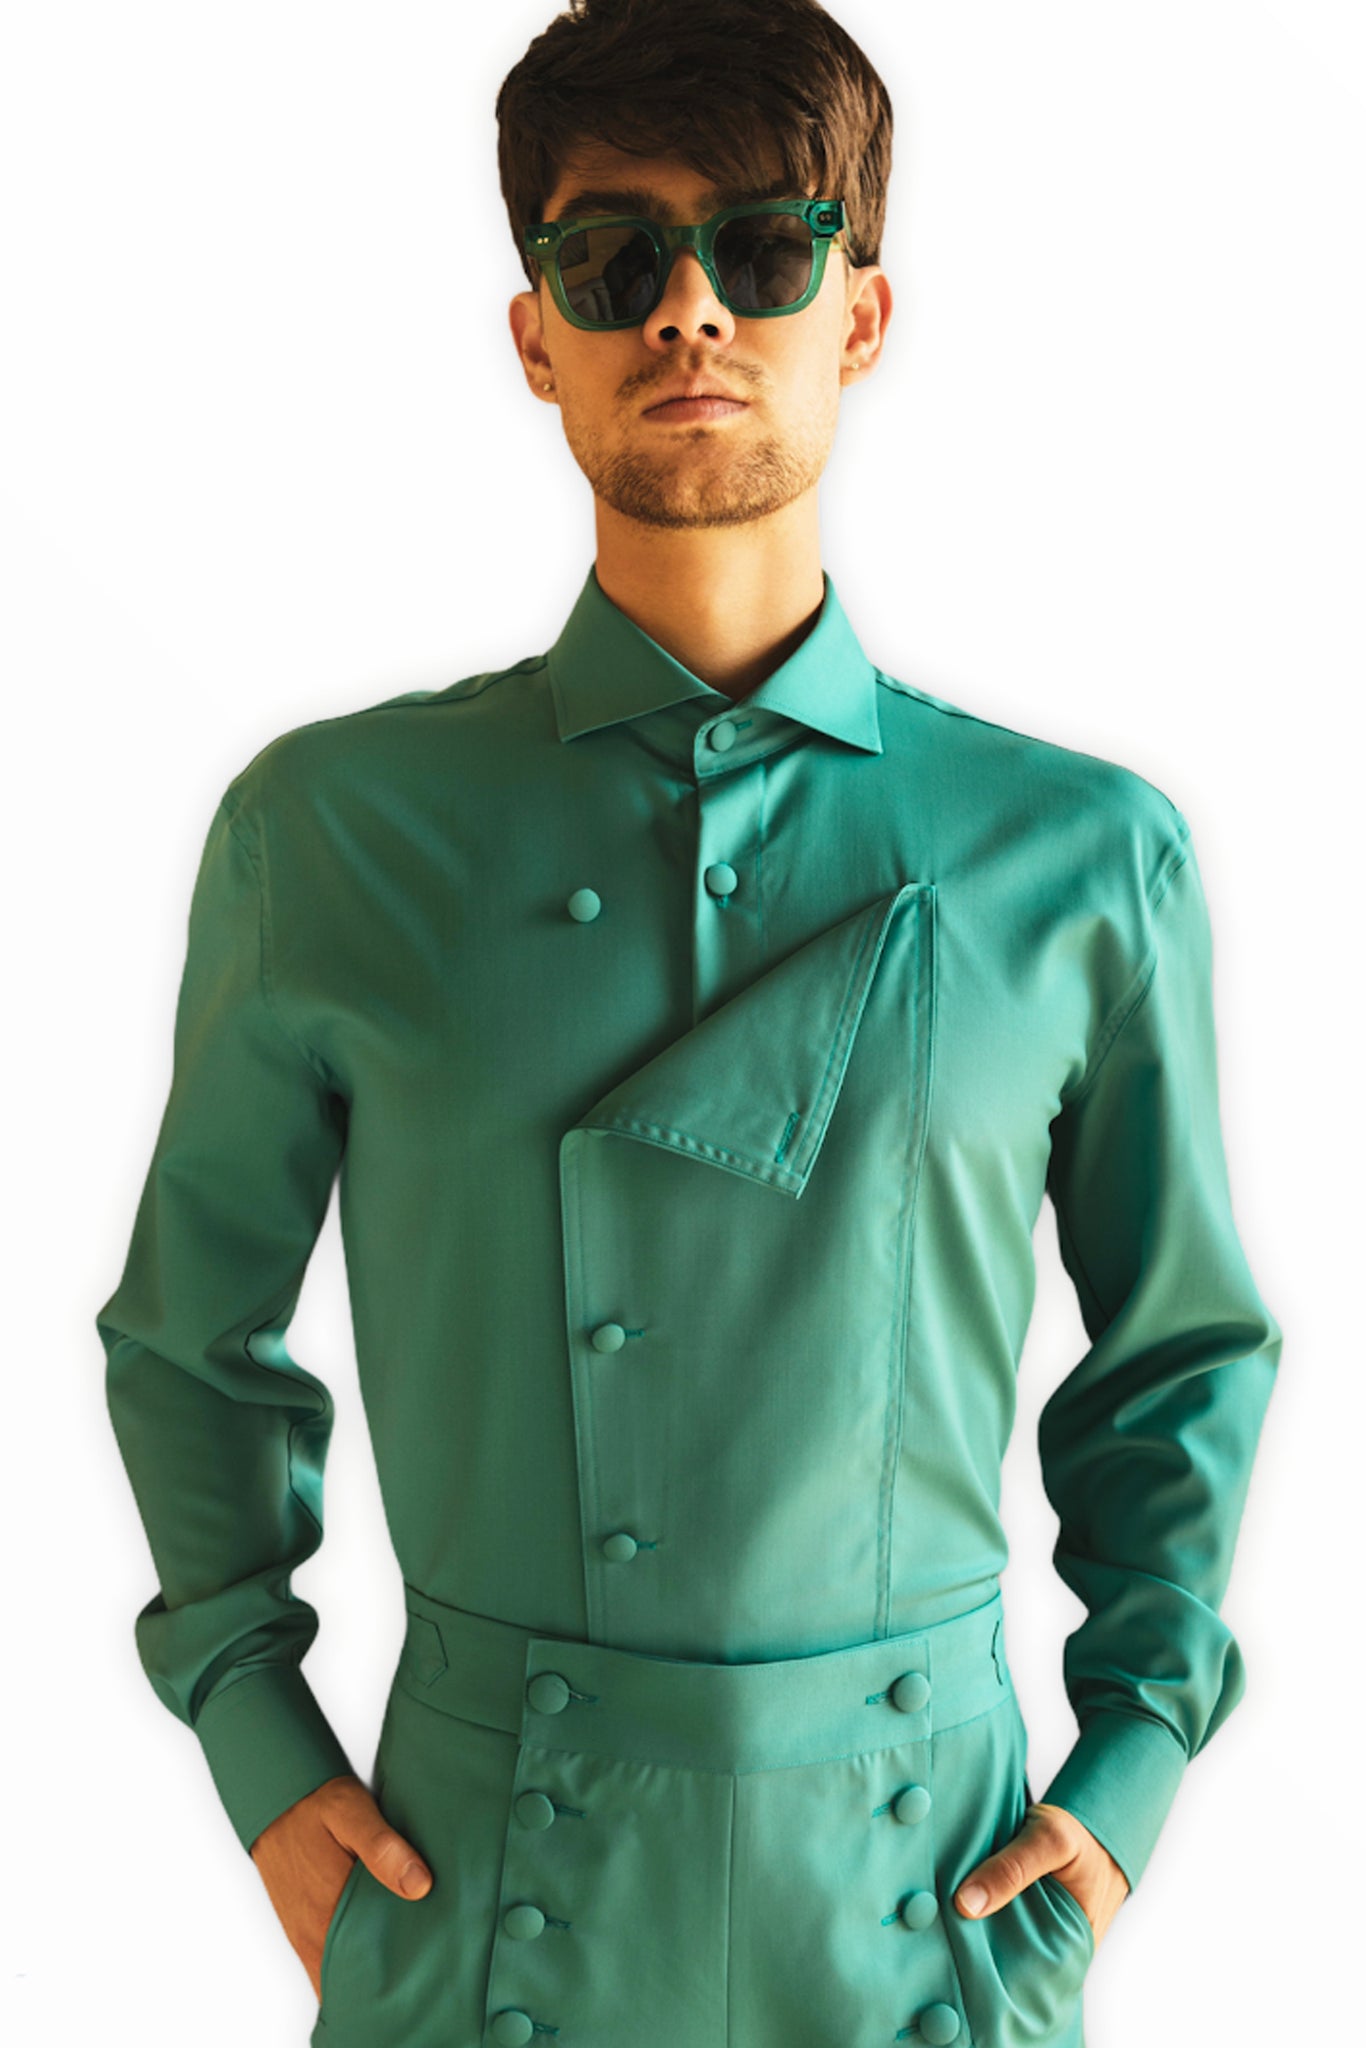 TEAL BUTTON DELUXE SIGNATURE LONG SLEEVE SHIRT